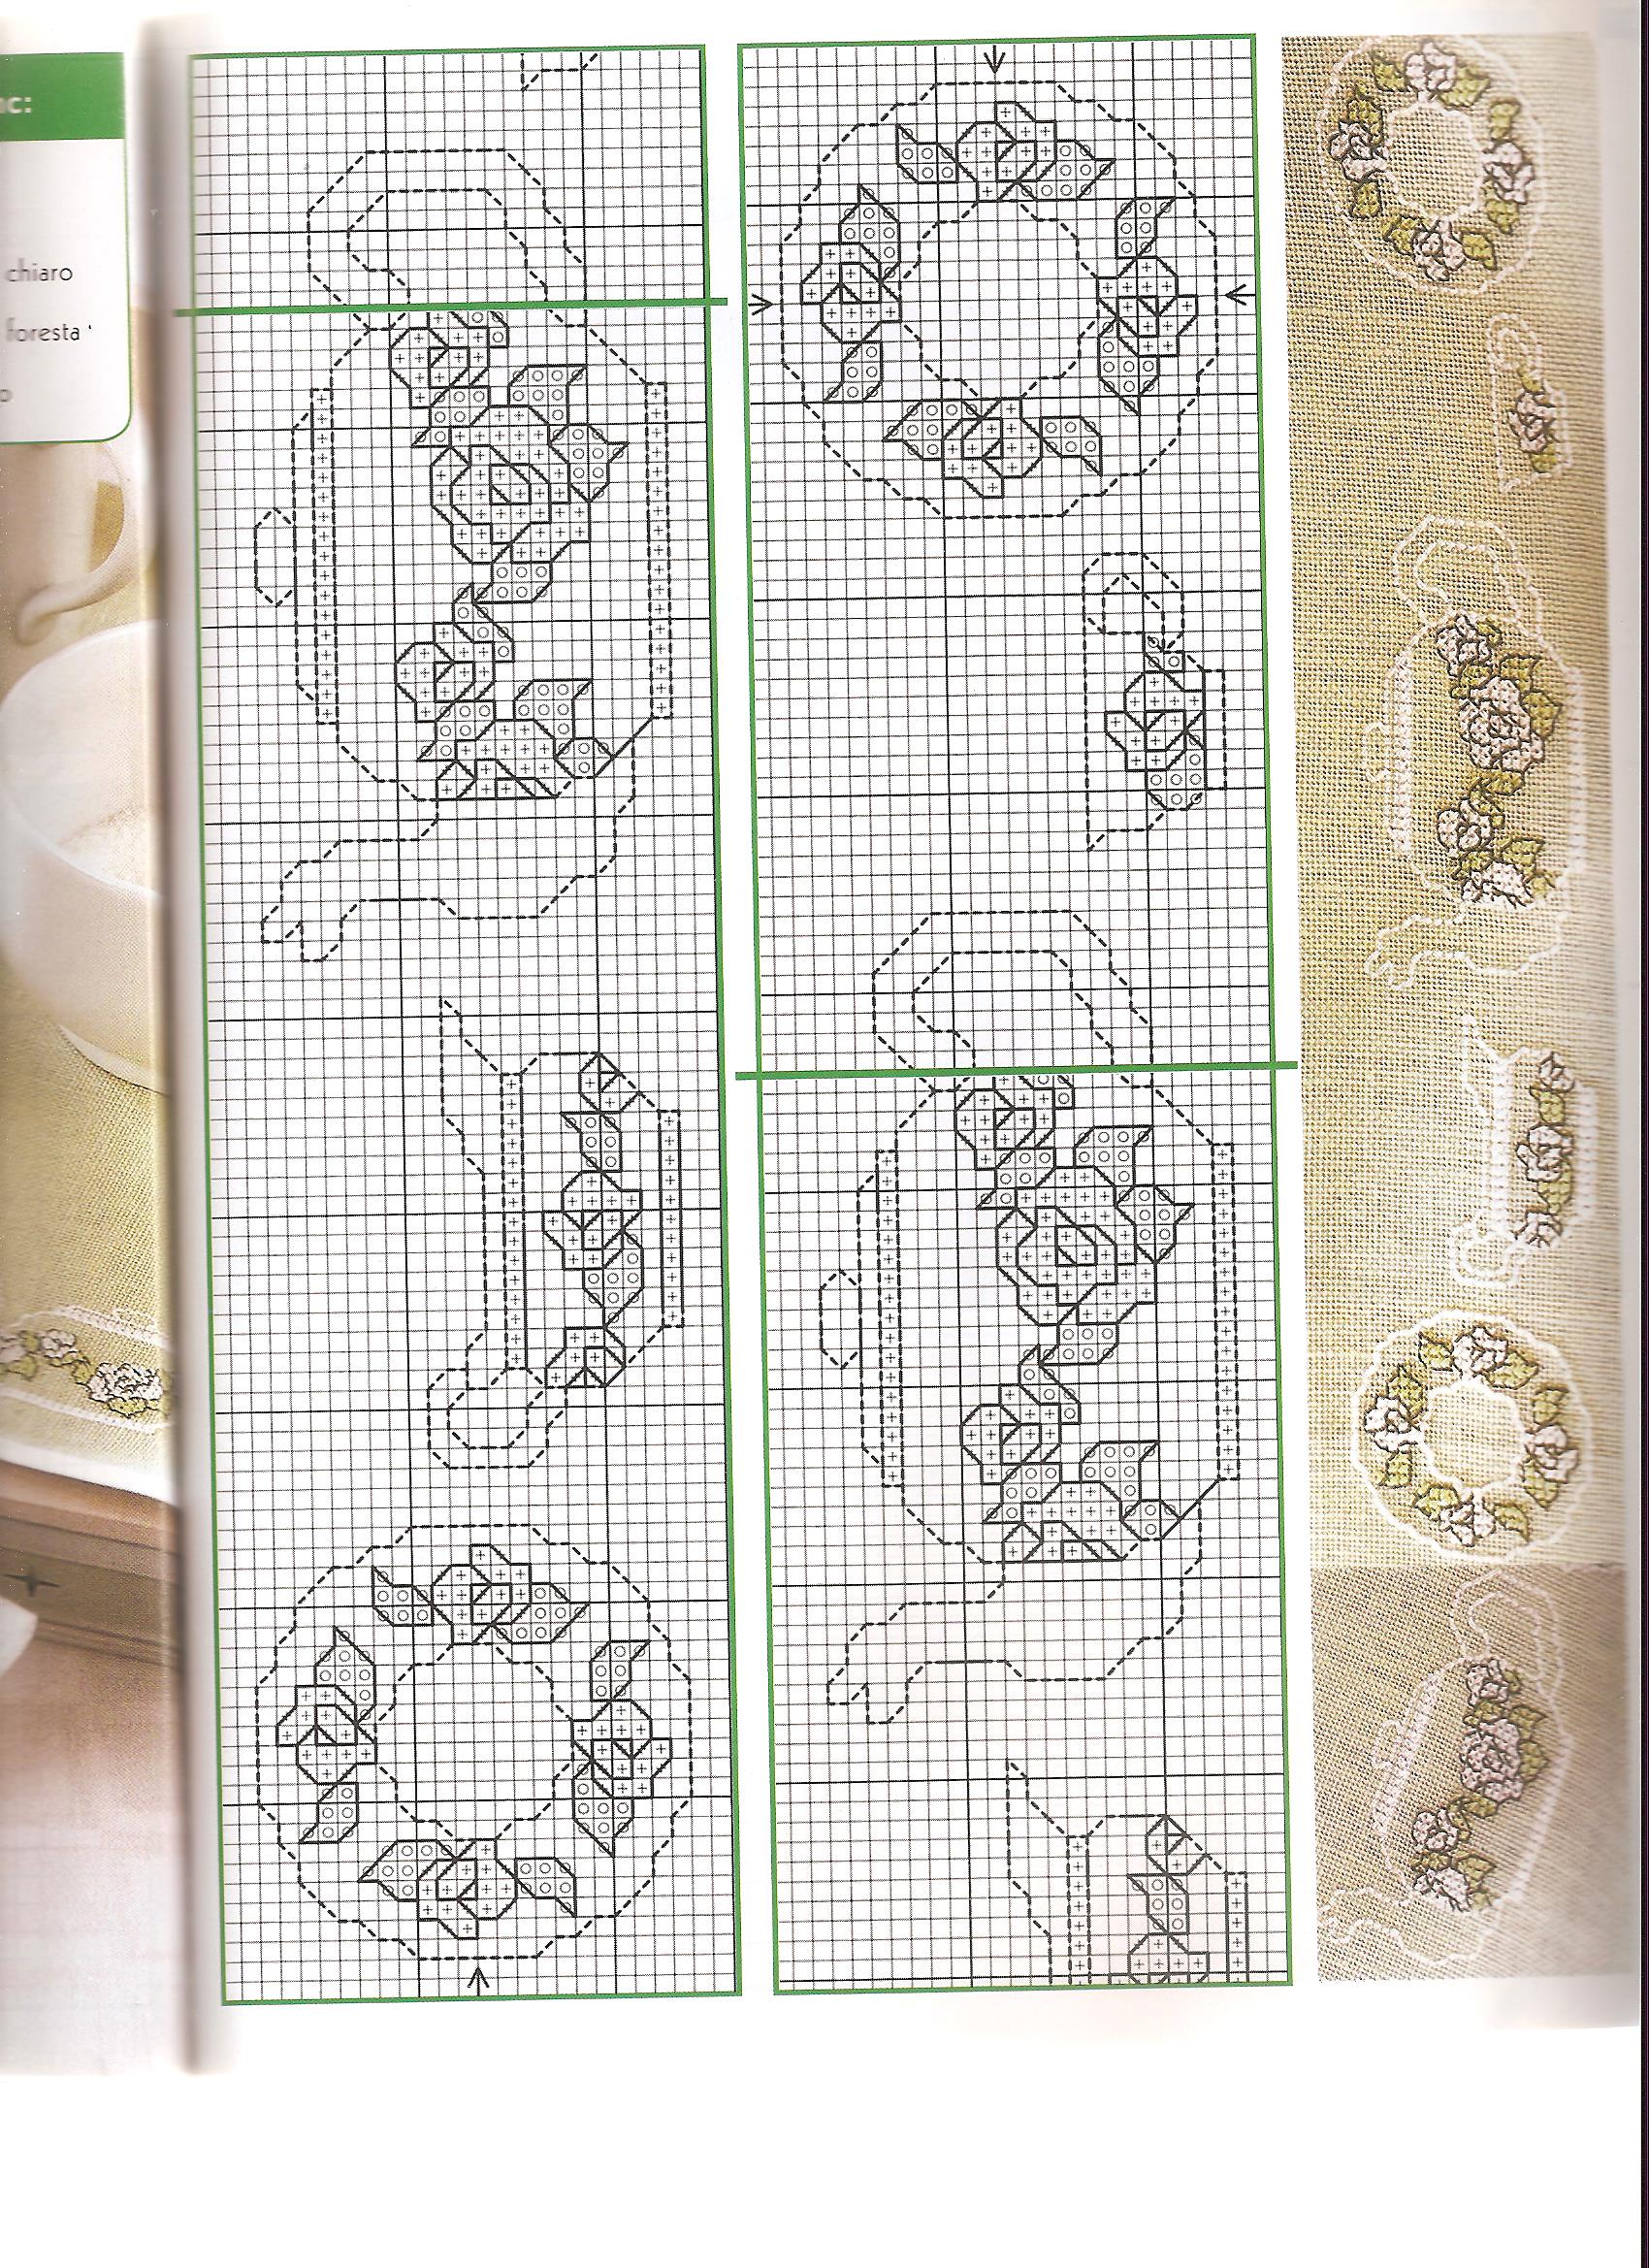 placemat cups teapots and roses (3)